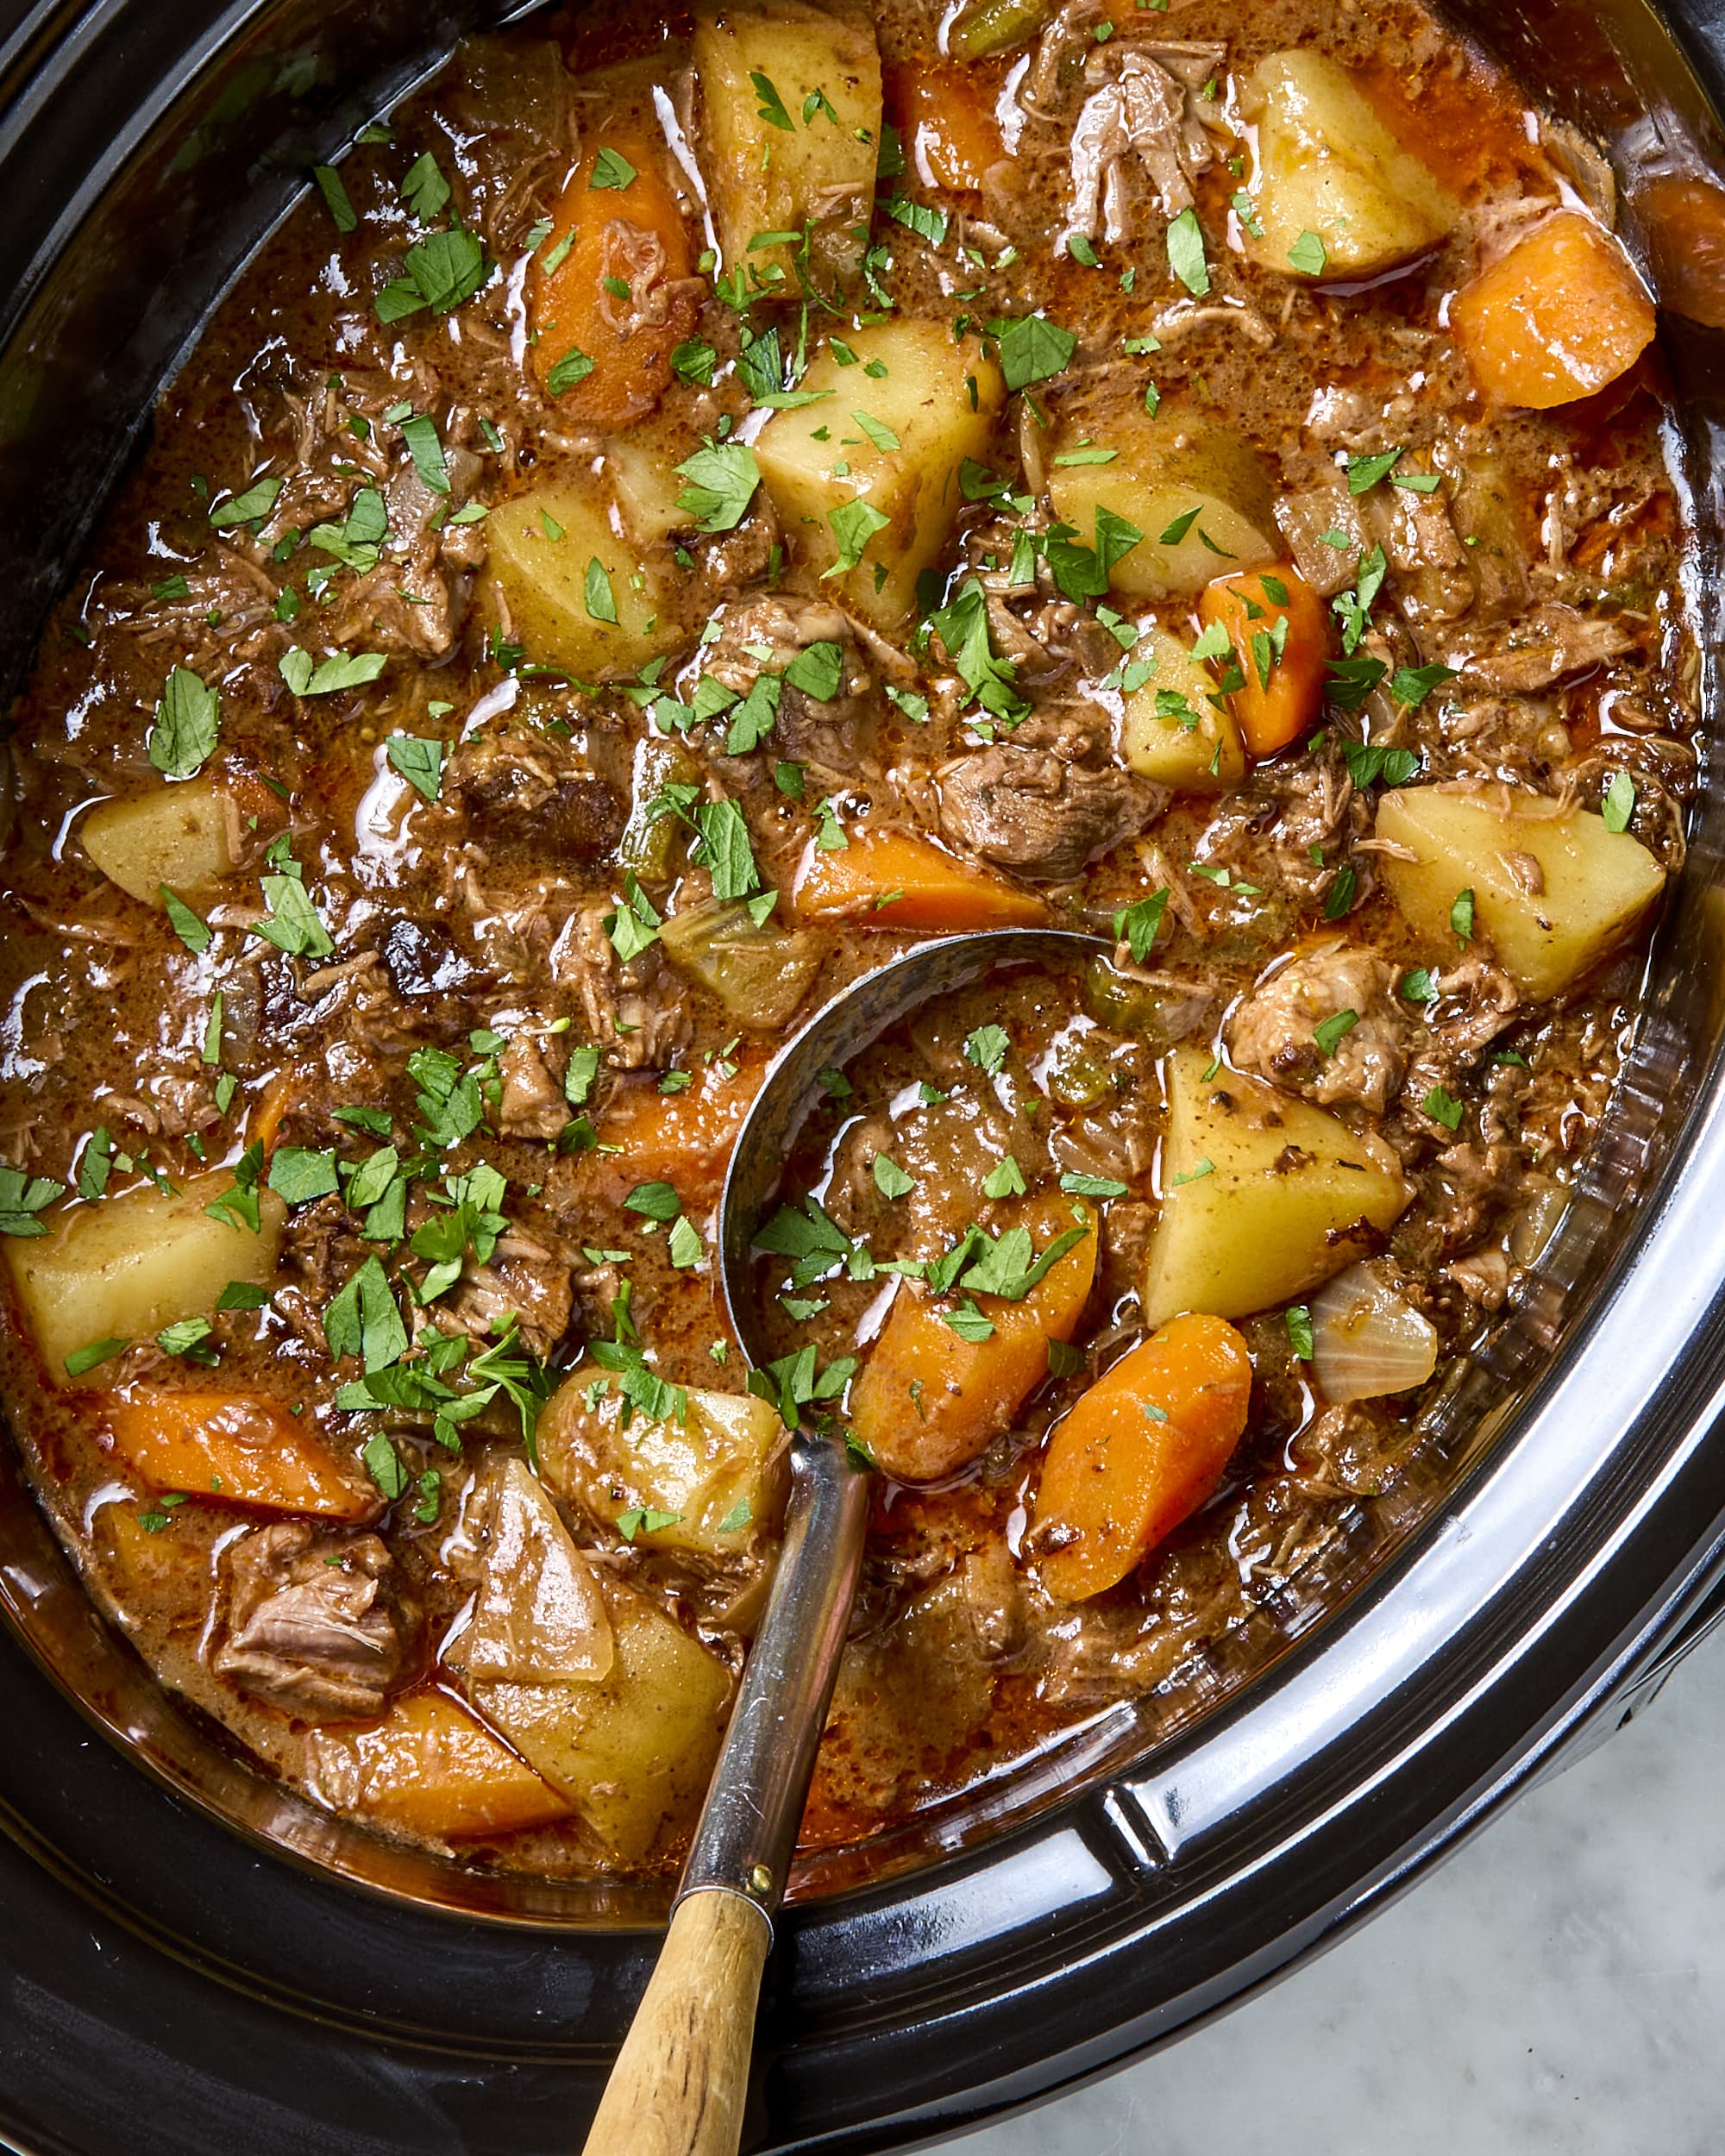 Slow-Cooker Classic Beef Stew Recipe